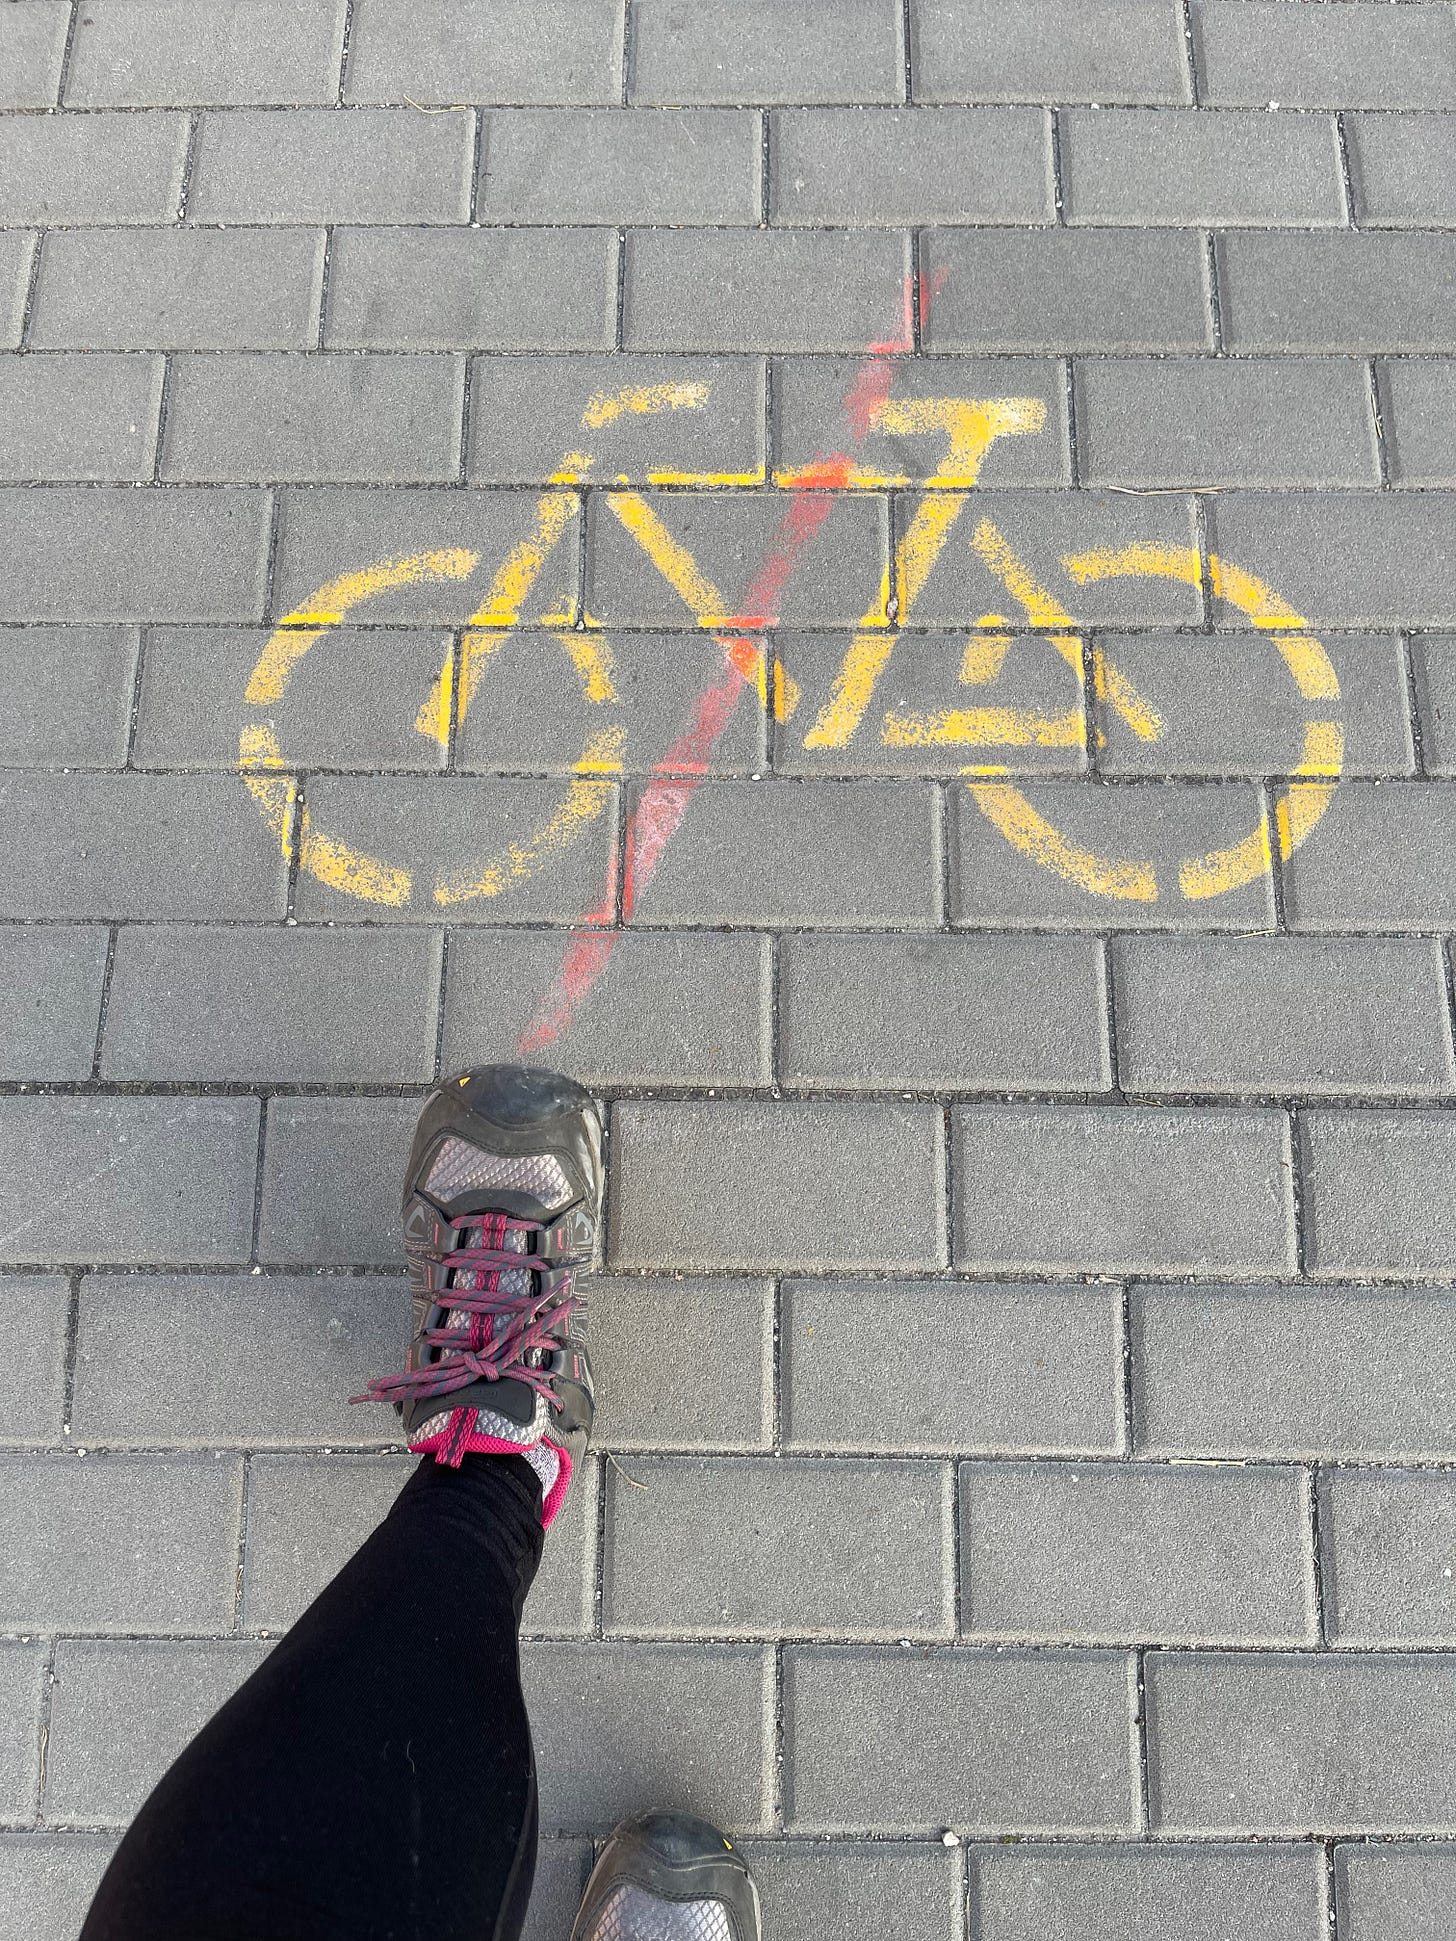 A picture of a shoe about to step on a spray painted icon on the ground of a bike with a red line drawn through it